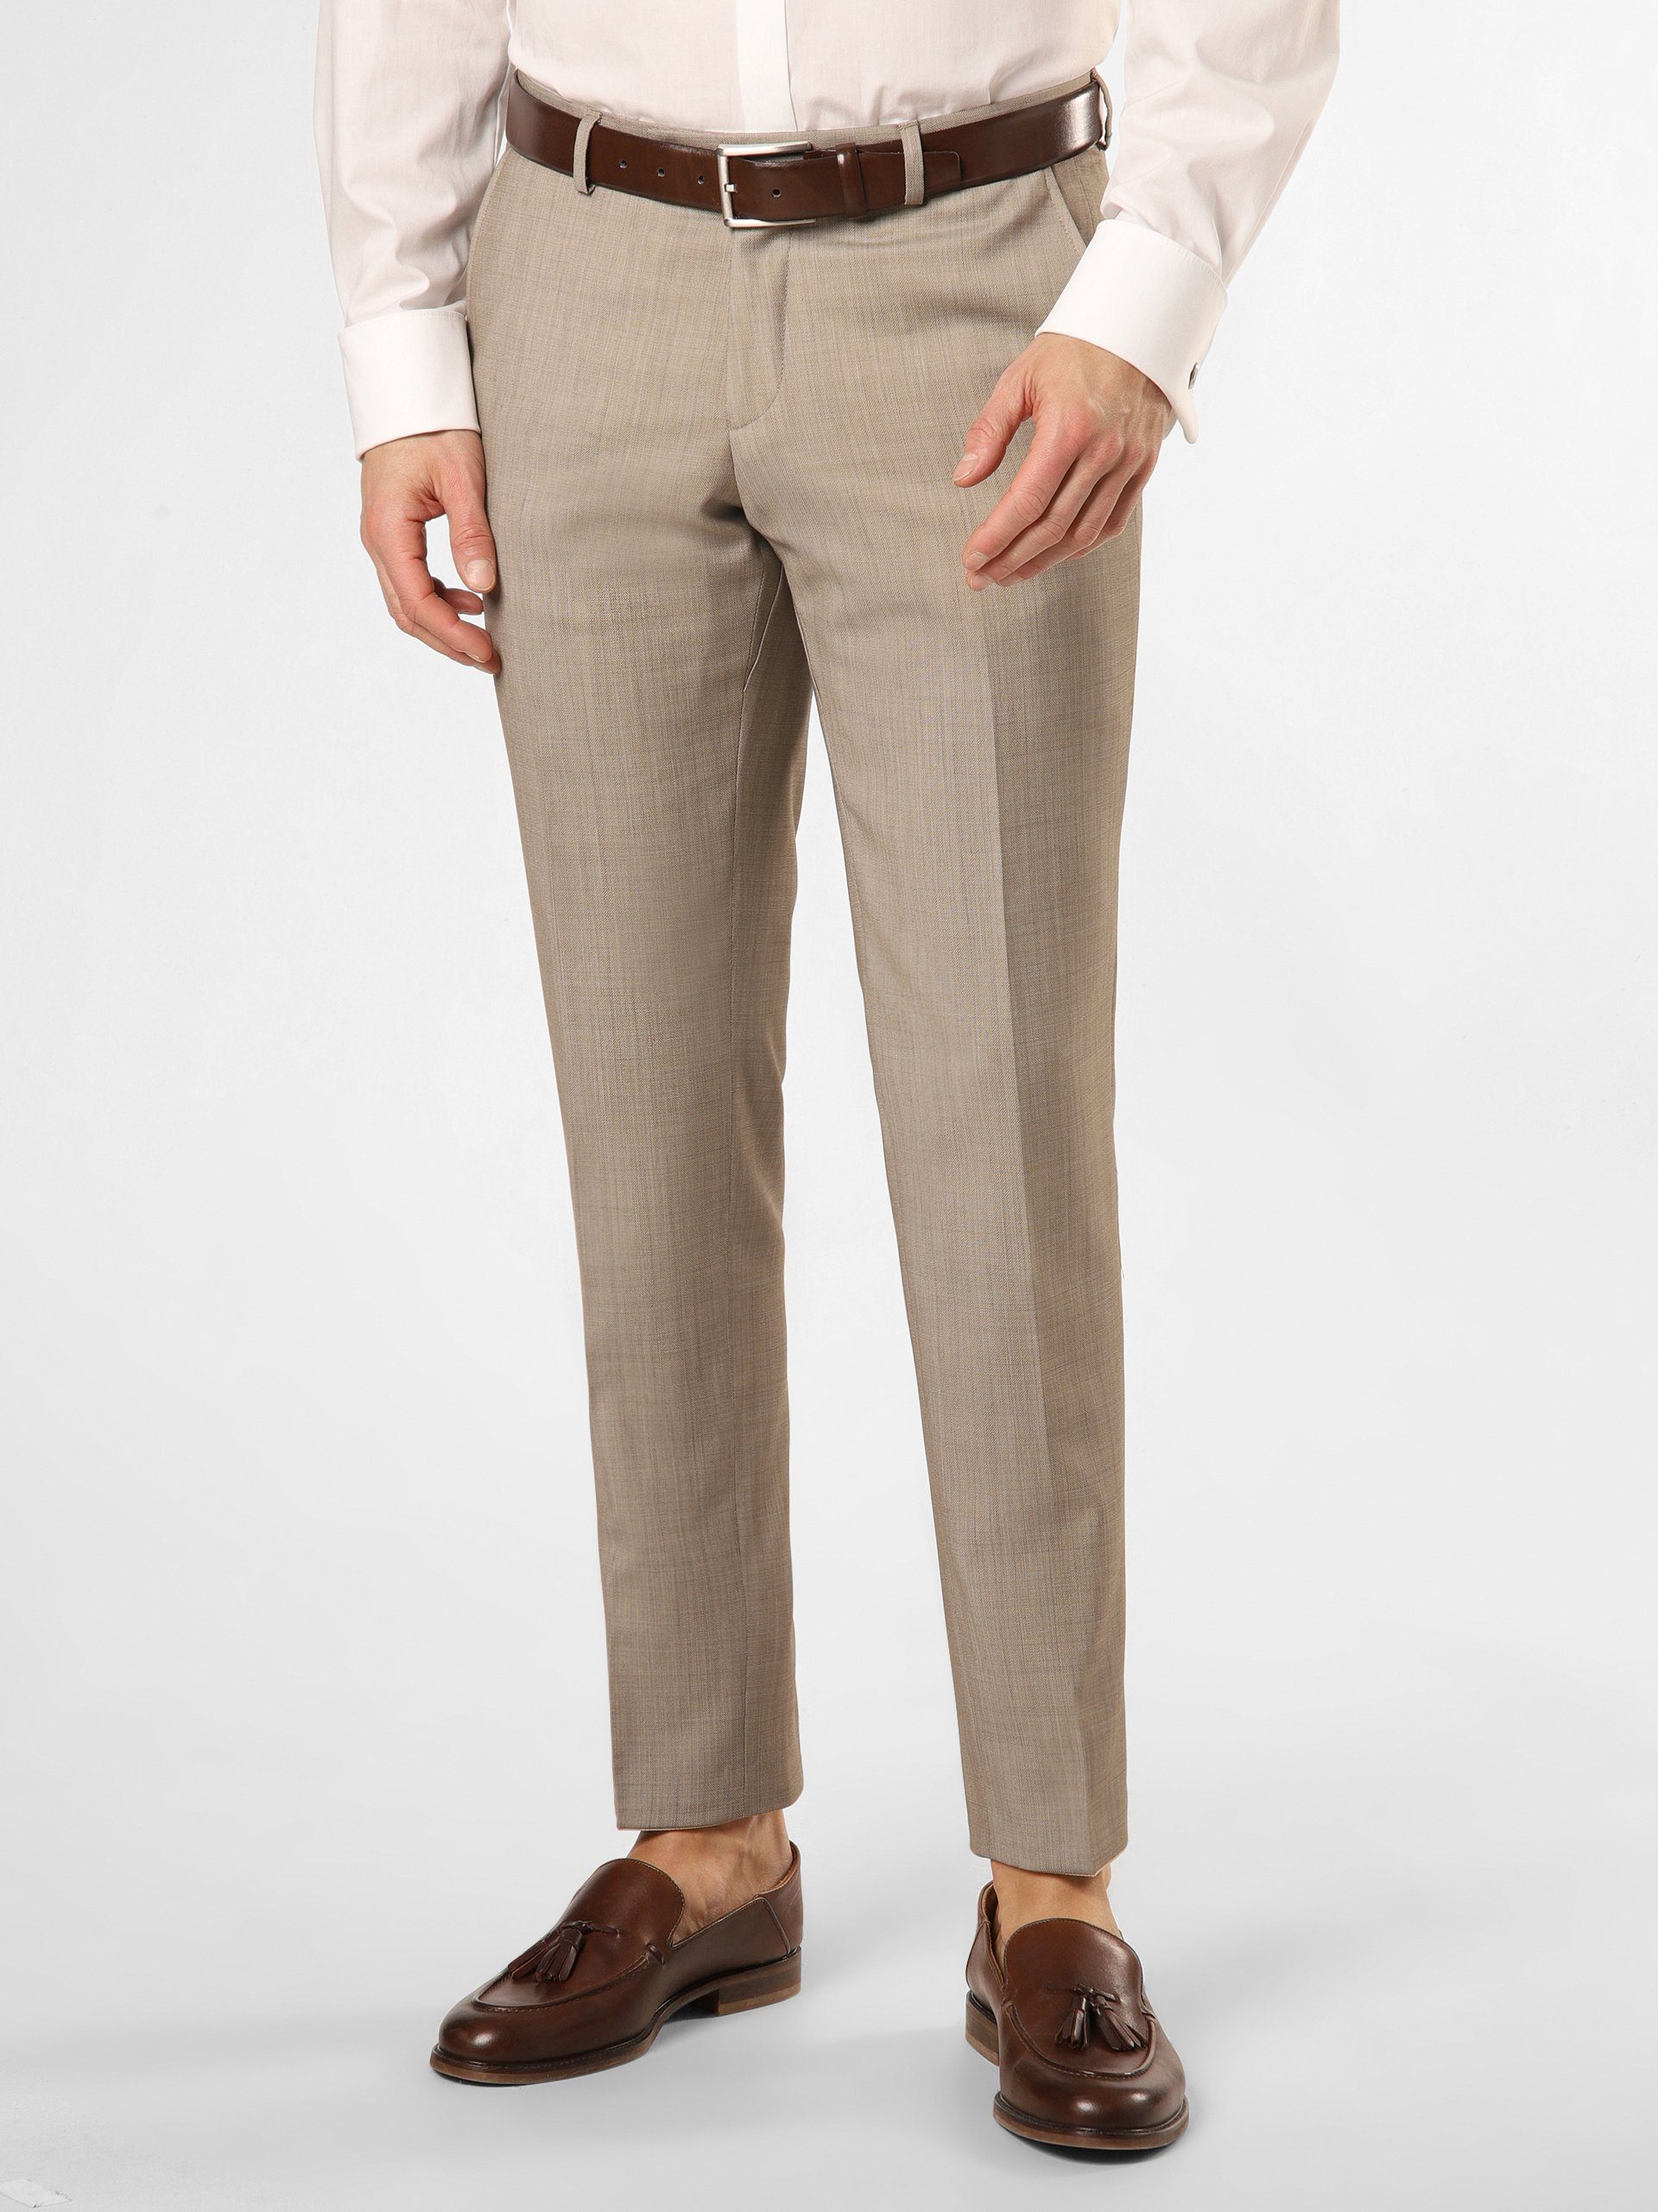 of Pascal Club beige Stoffhose Gents CG Gross Carl